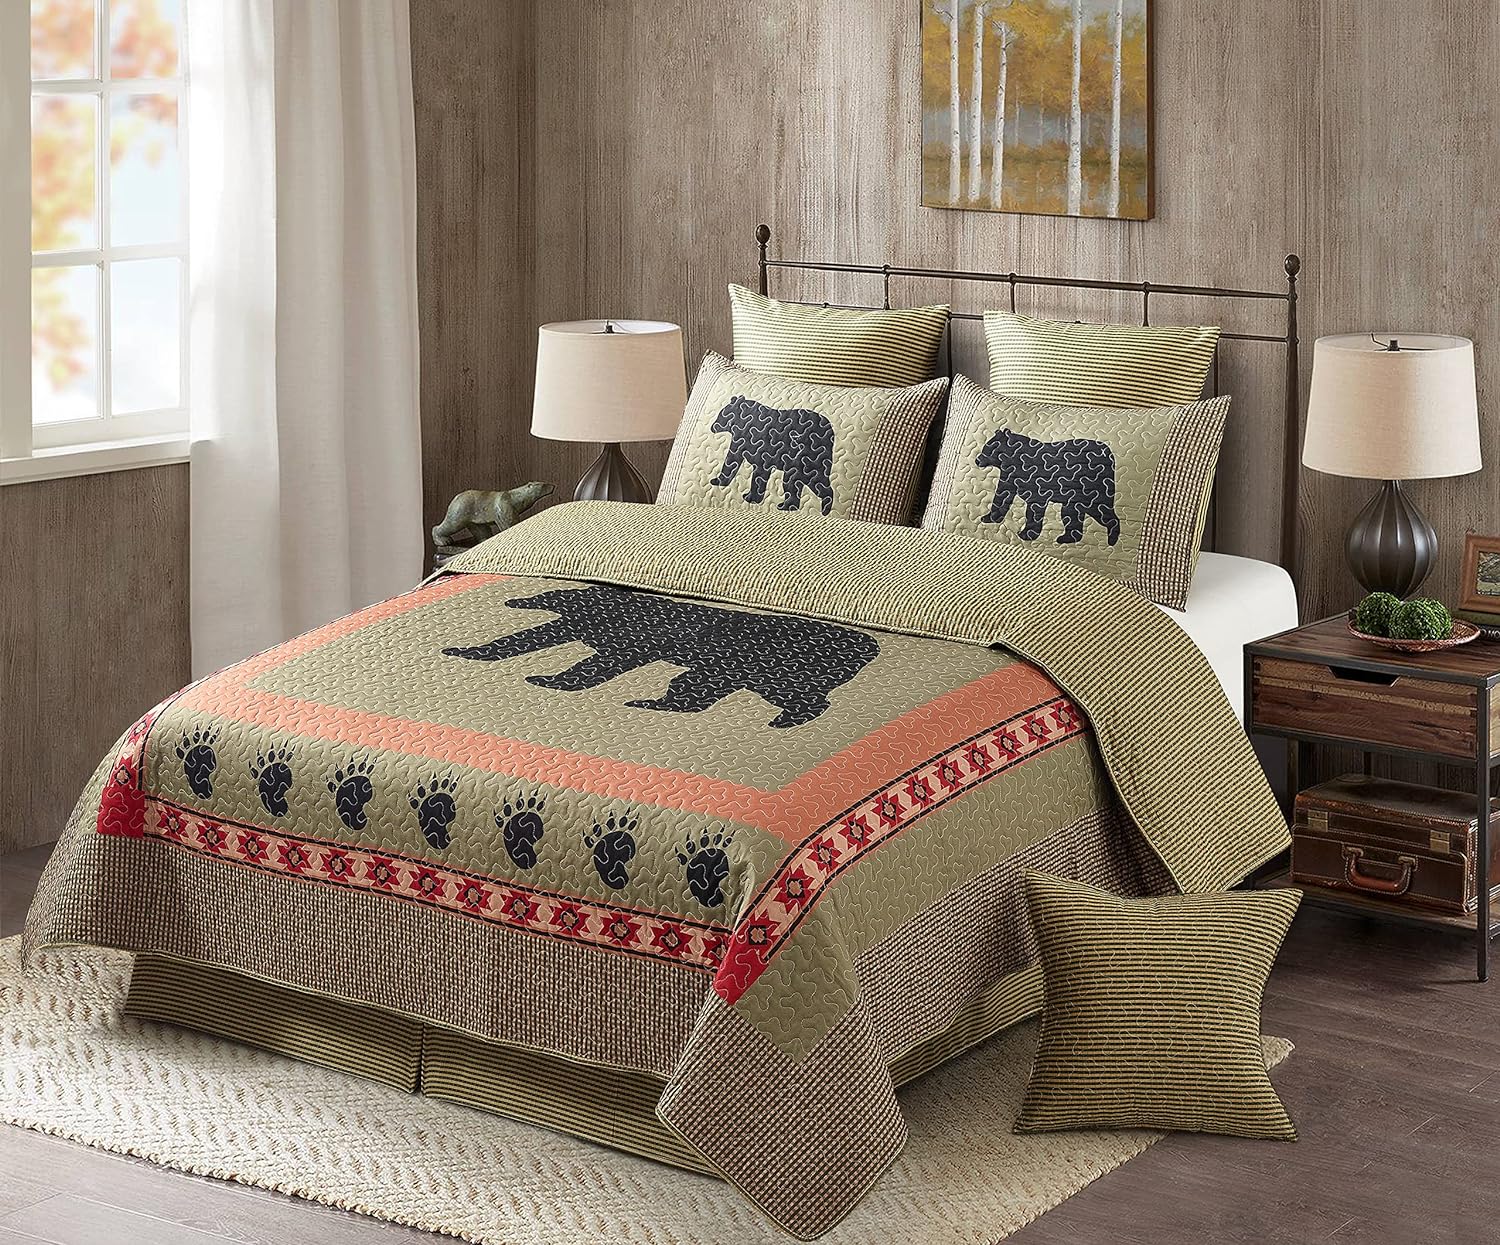 Virah Bella 3 Piece Full/Queen Cabin Quilt Bedding Set - Bear and Paw - Rustic Country Reversible Patchwork Comforter Set with Decorative Pillow Shams